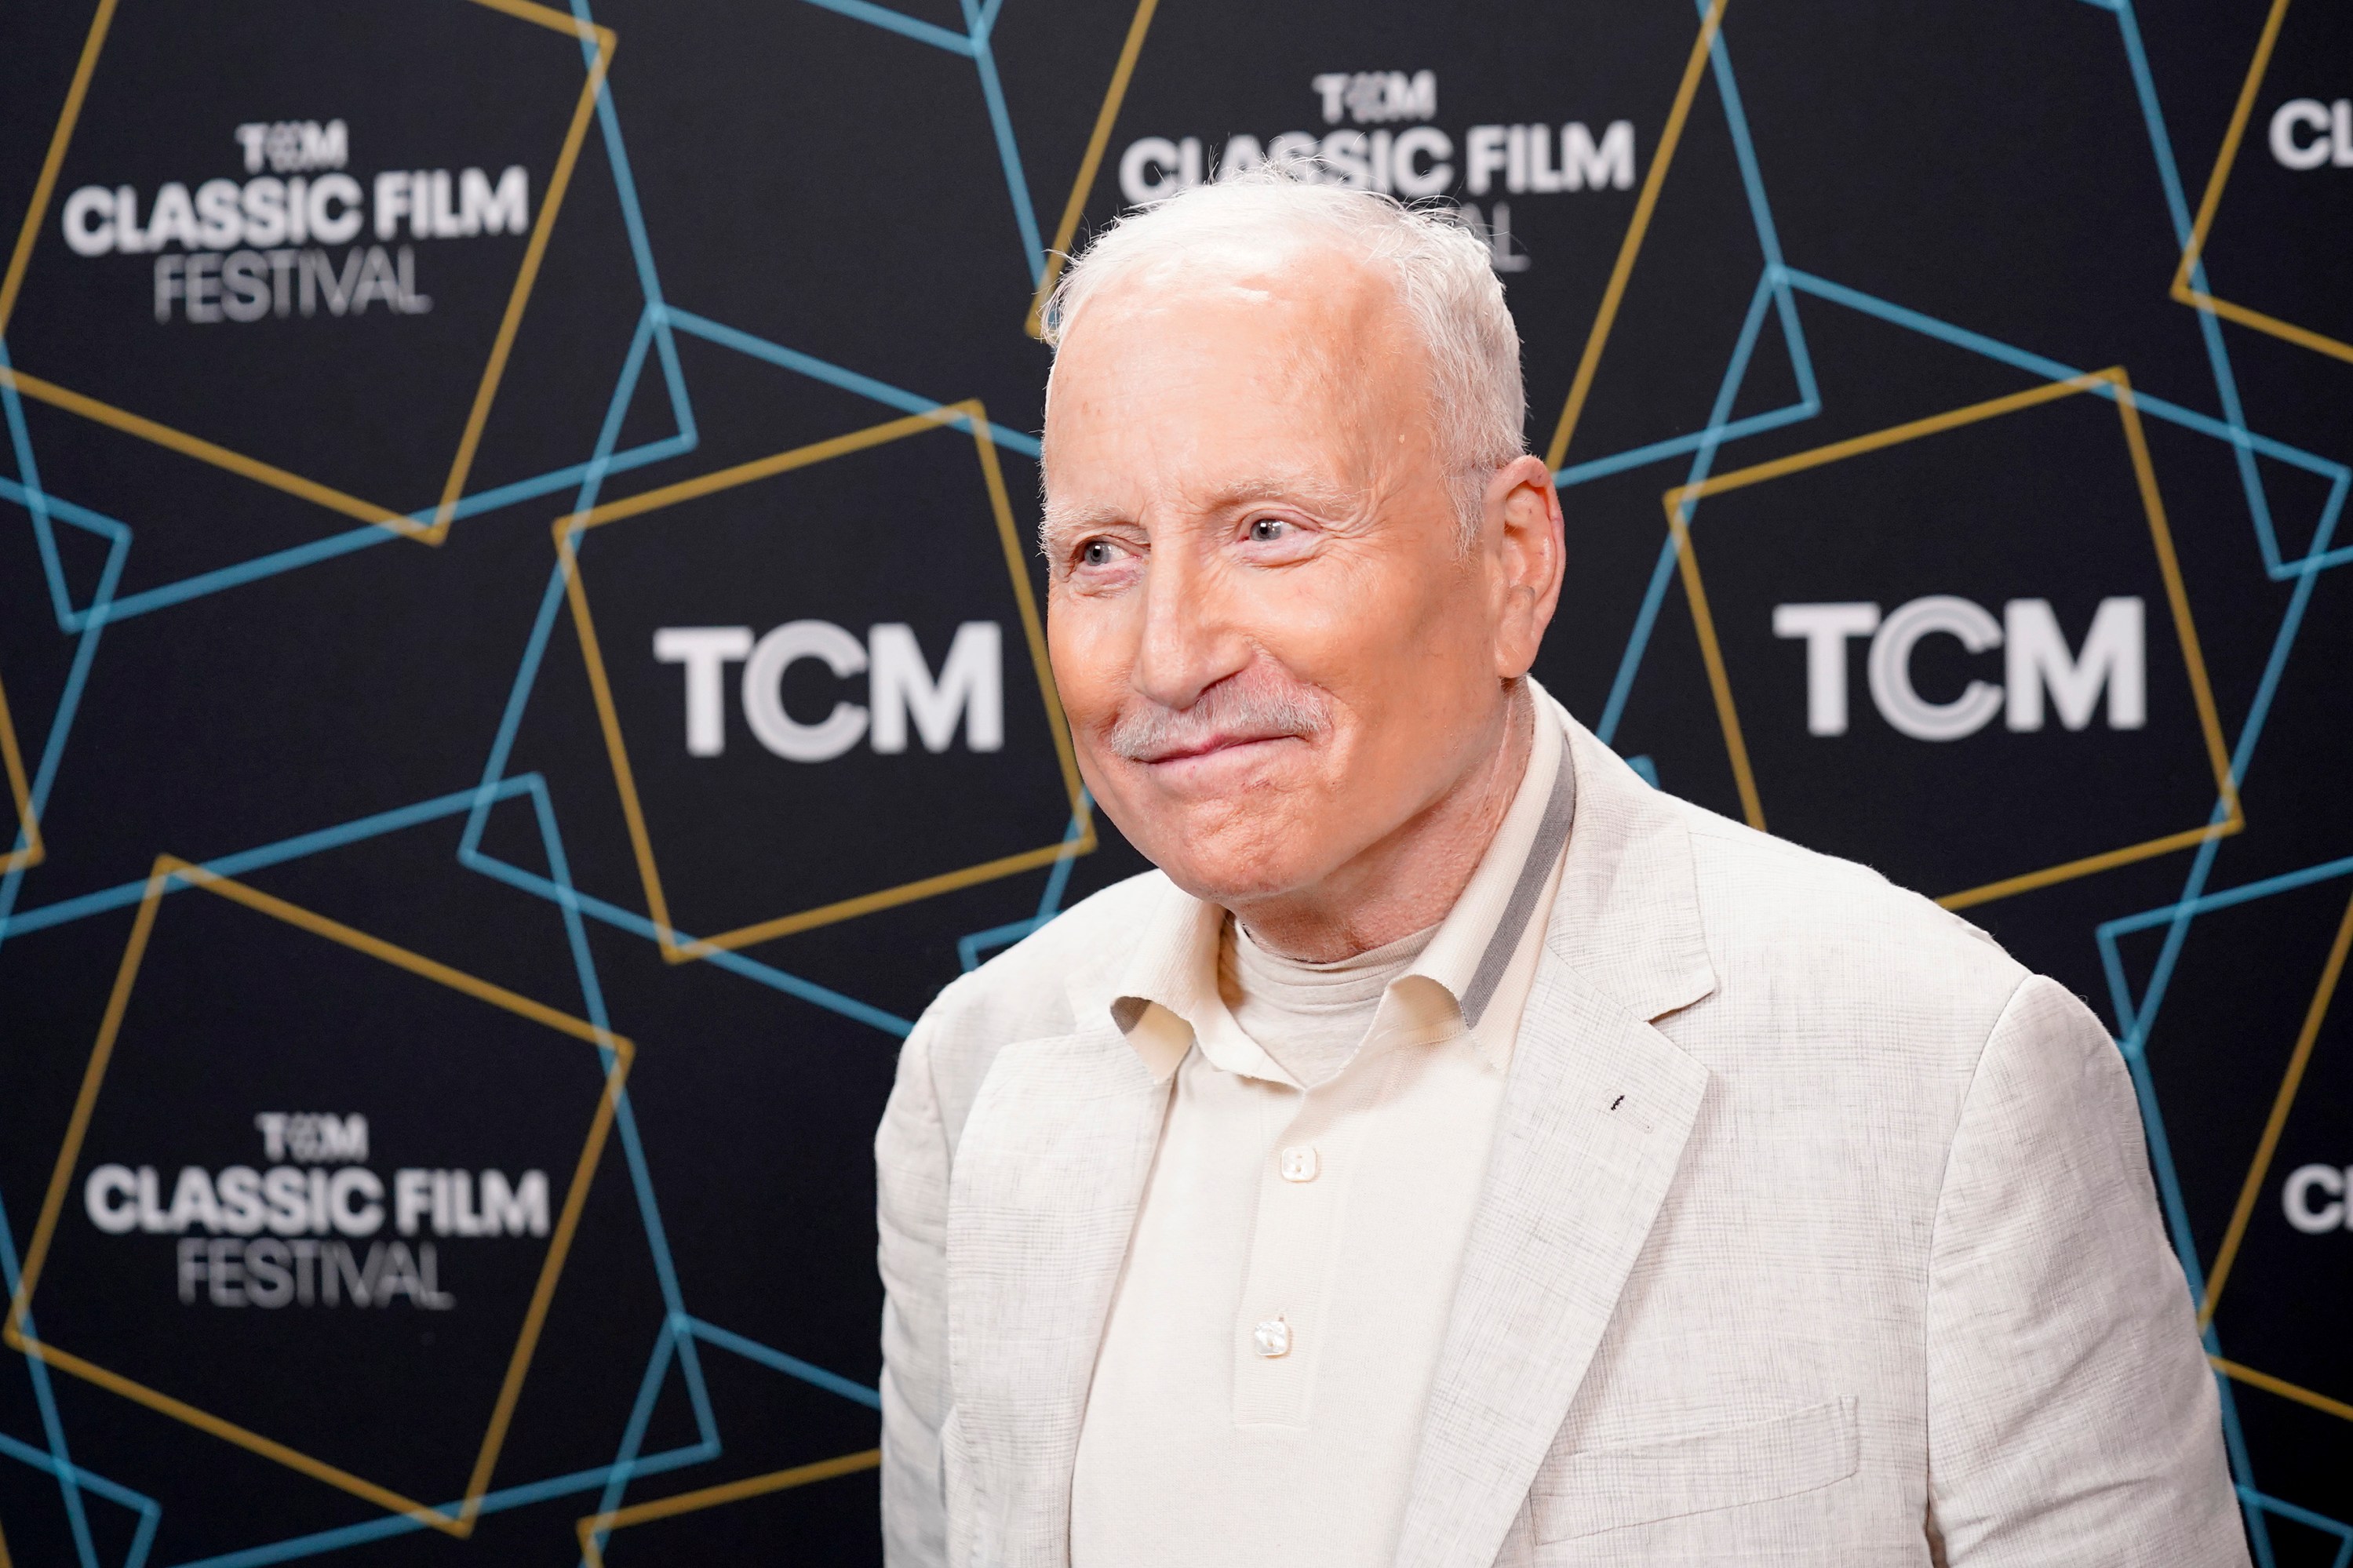 LOS ANGELES, CALIFORNIA - APRIL 14: Richard Dreyfuss attends the screening of “American Graffiti” during the 2023 TCM Classic Film Festival on April 14, 2023 in Los Angeles, California. (Photo by Presley Ann/Getty Images for TCM)